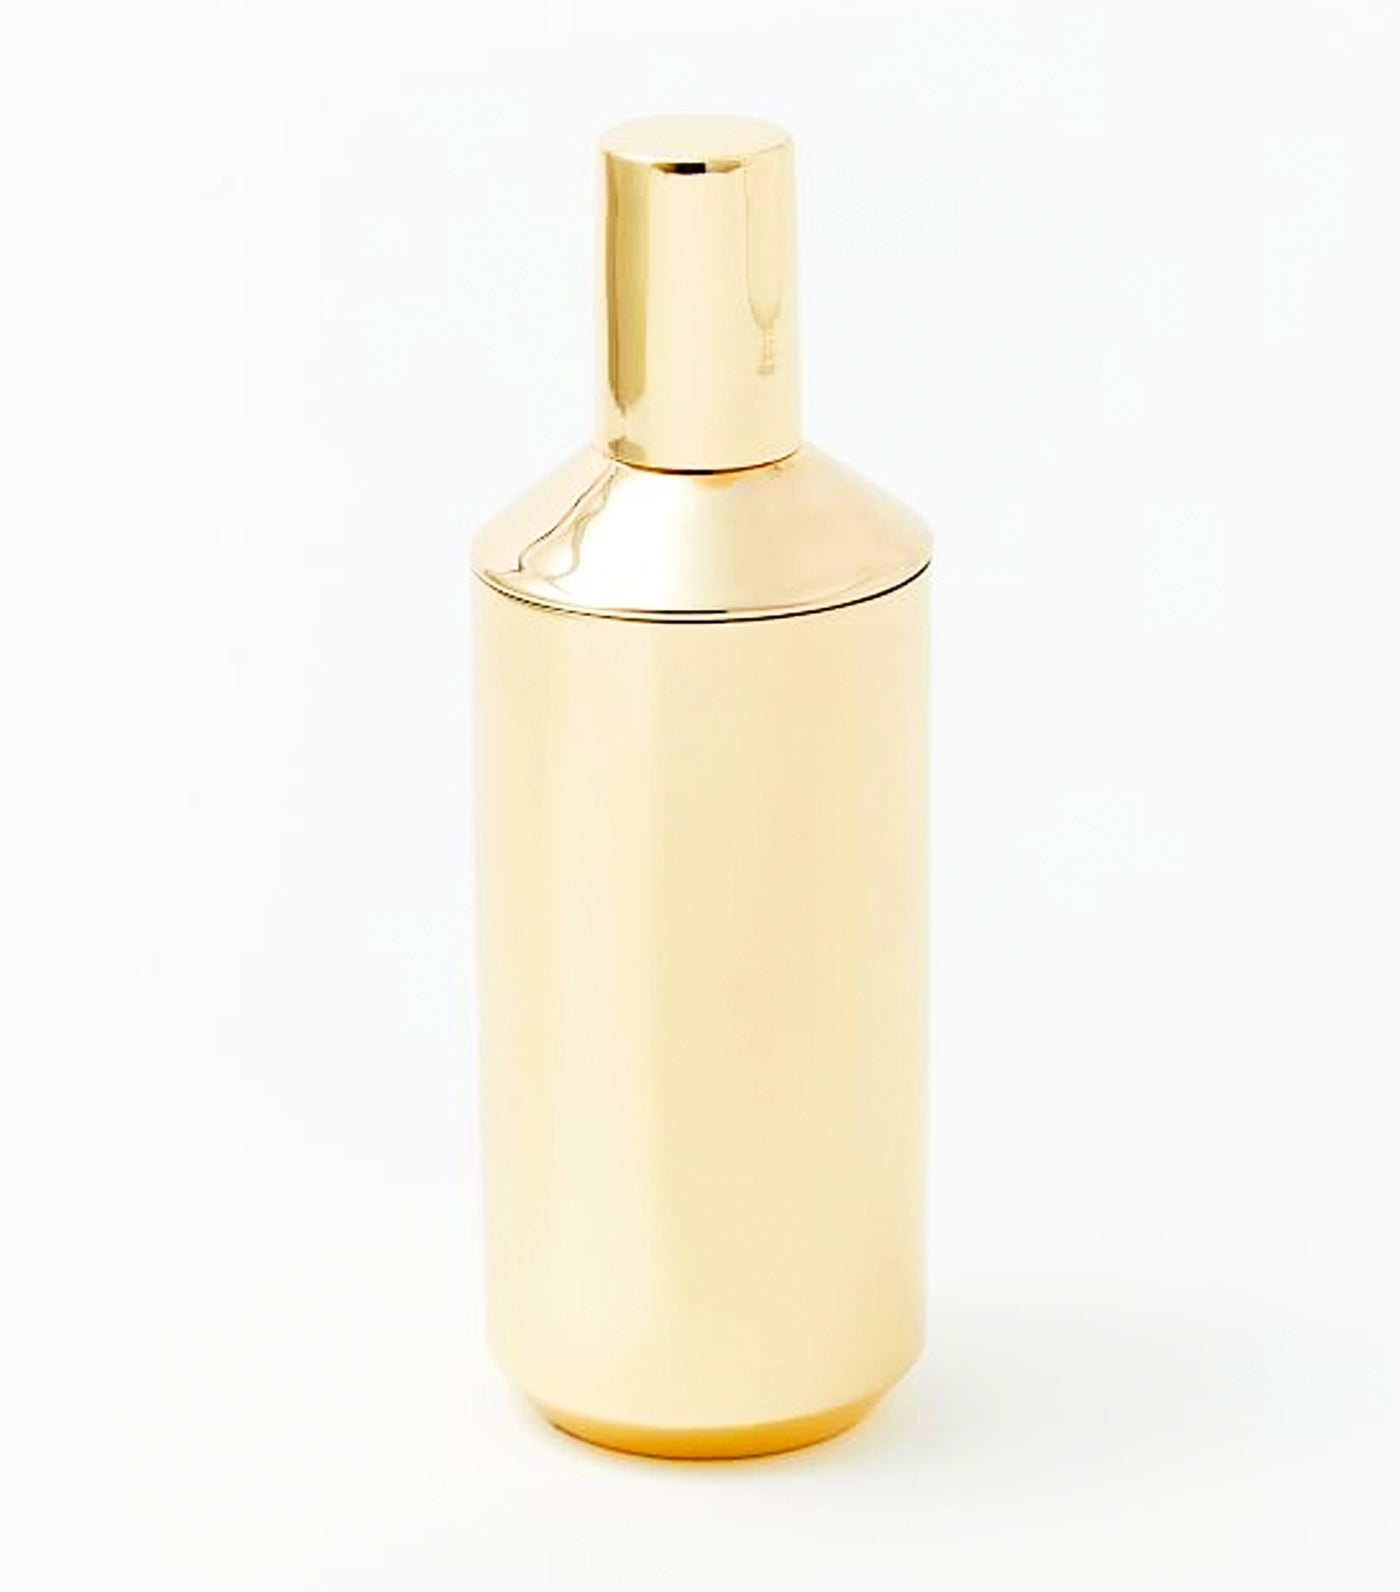 West Elm Chelsea Barware Collection - Cocktail Shaker